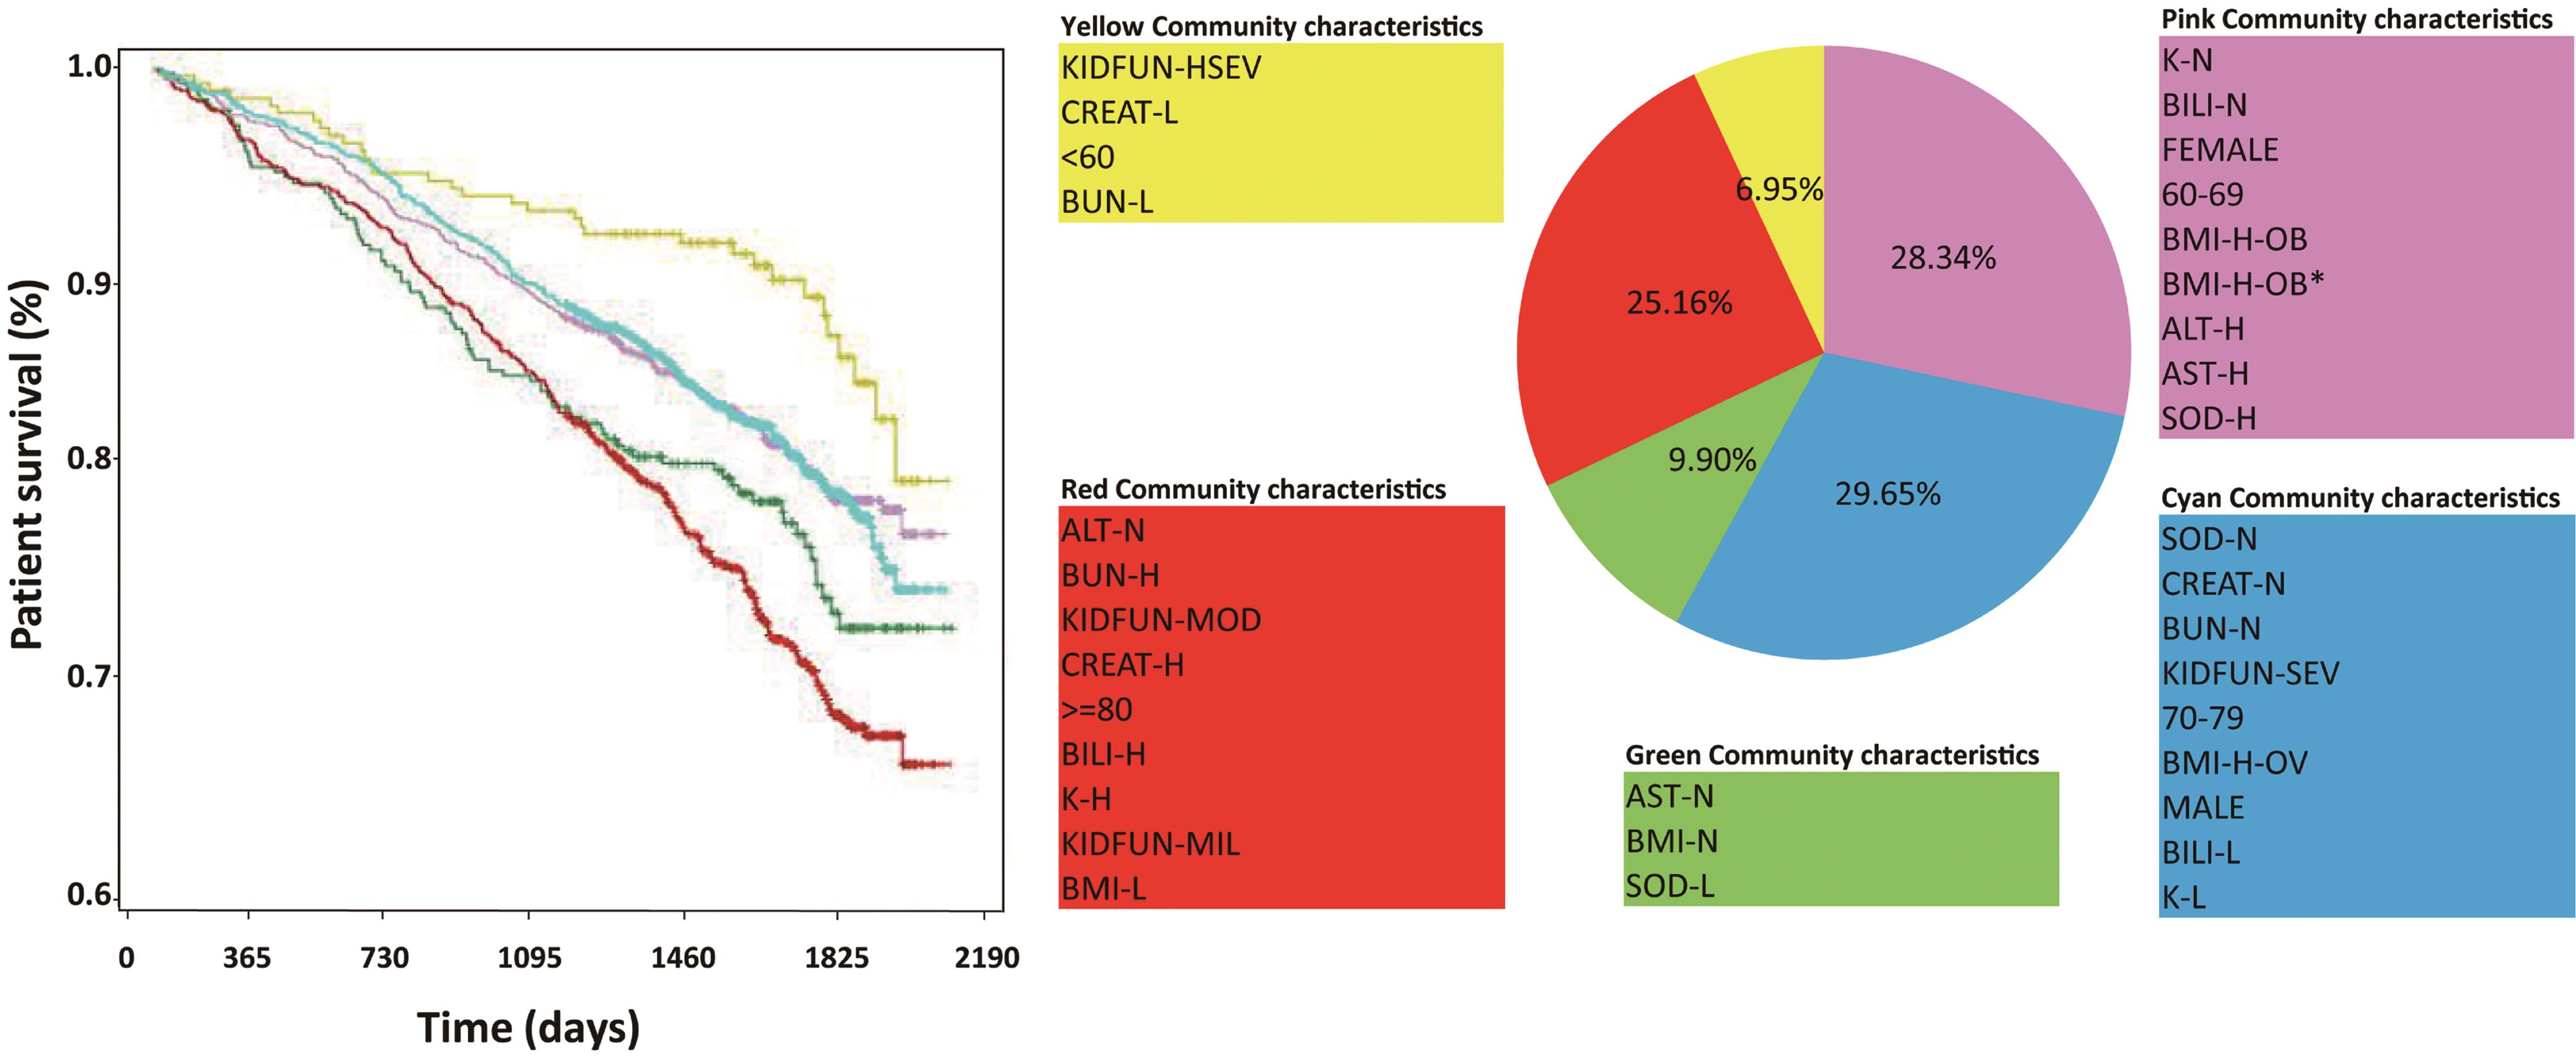 Communities found among Liver & kidney panel – Kaplan-Meier survival curve and defining medical variables.